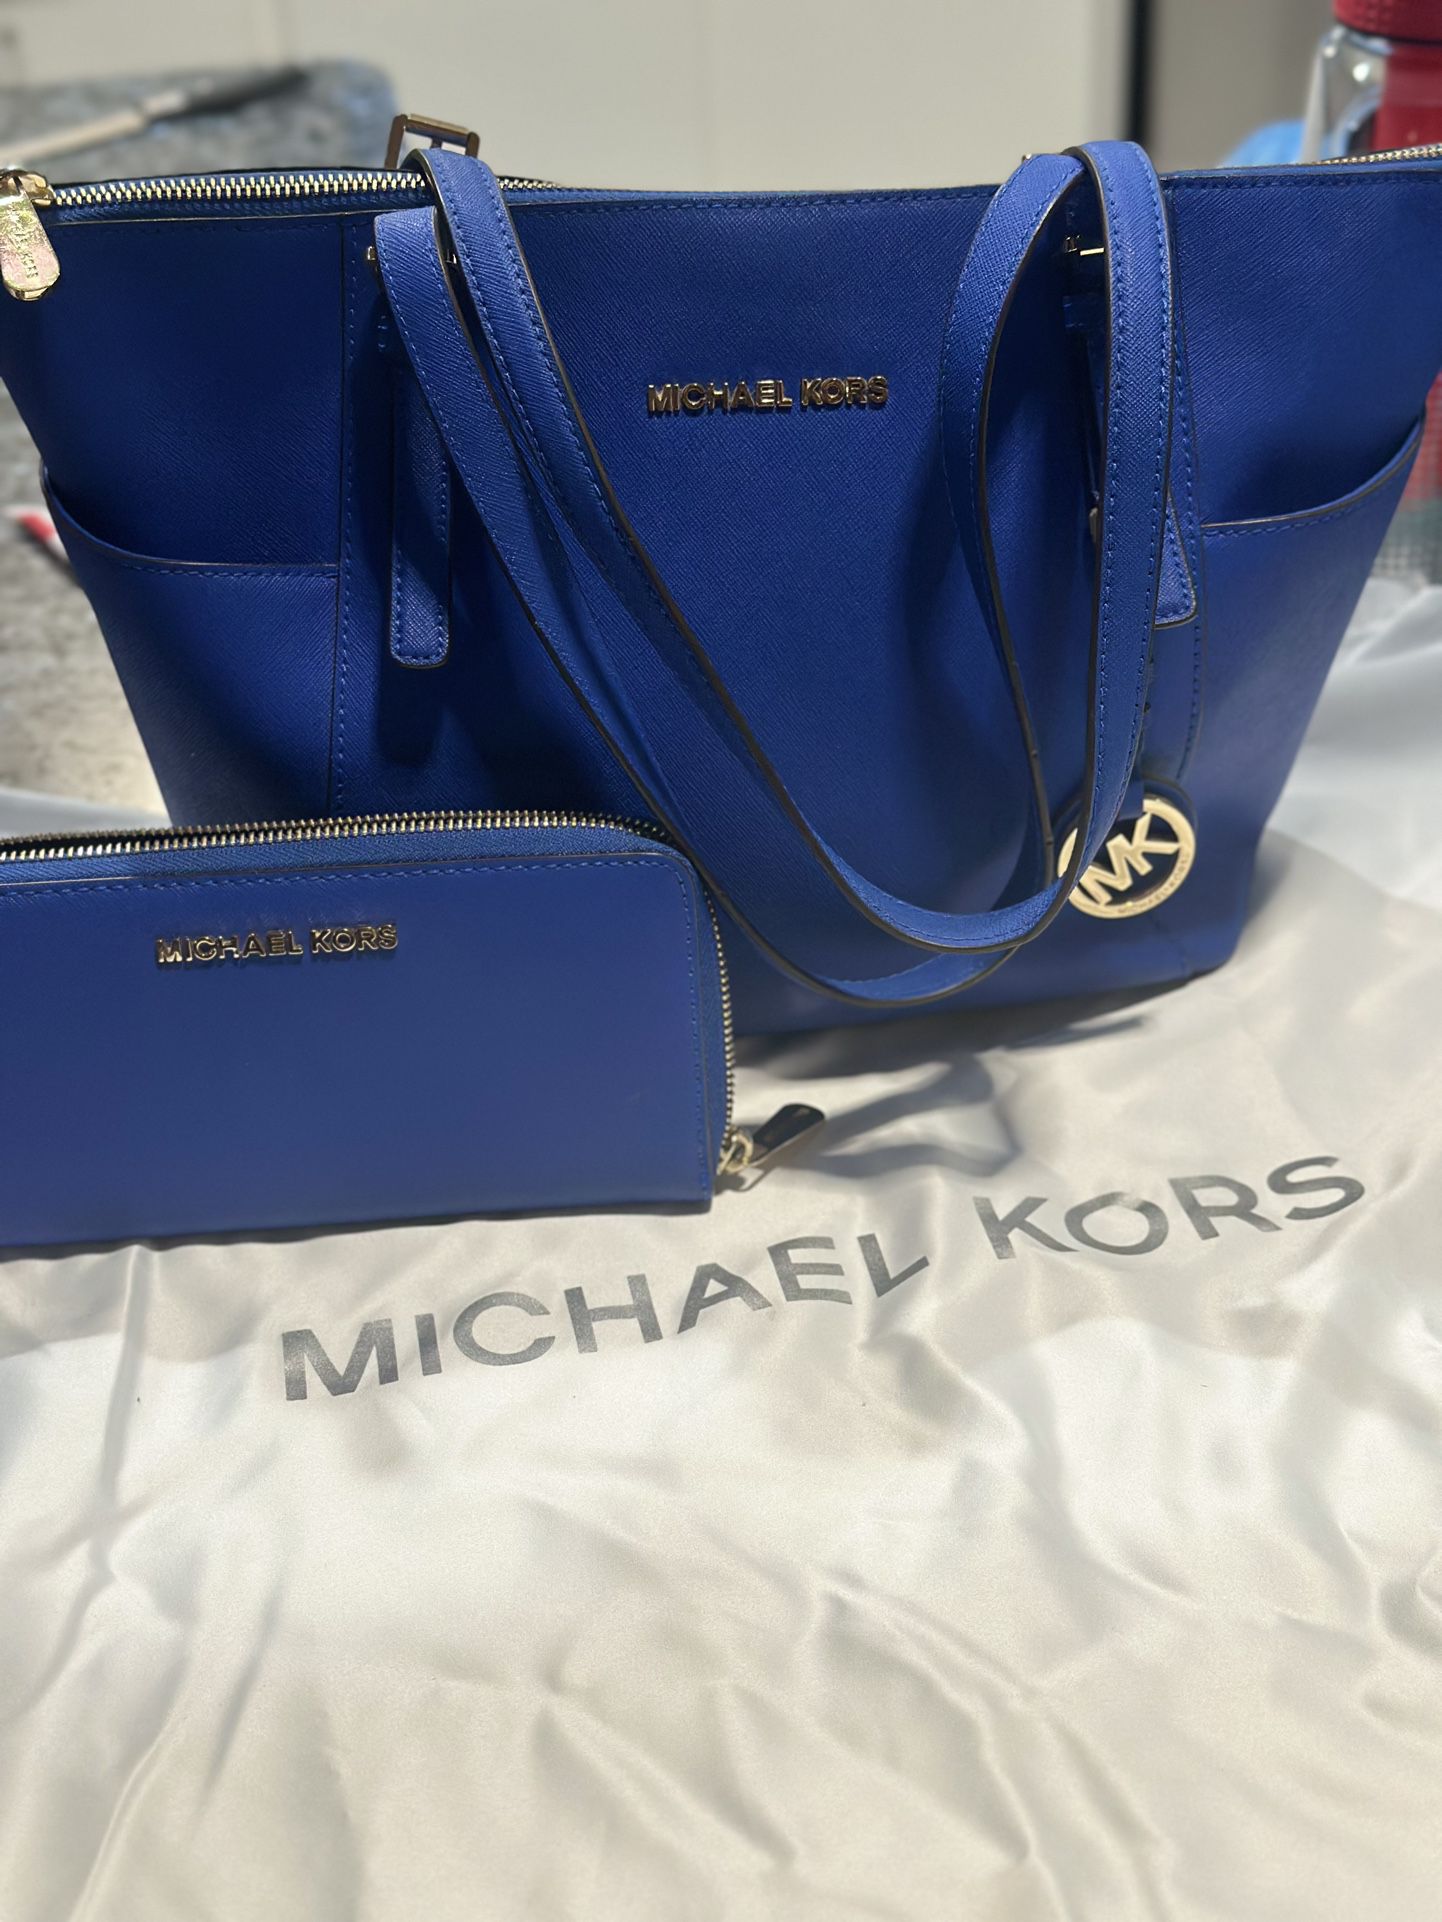 Micheal Kors Purse With Matching Wallet 